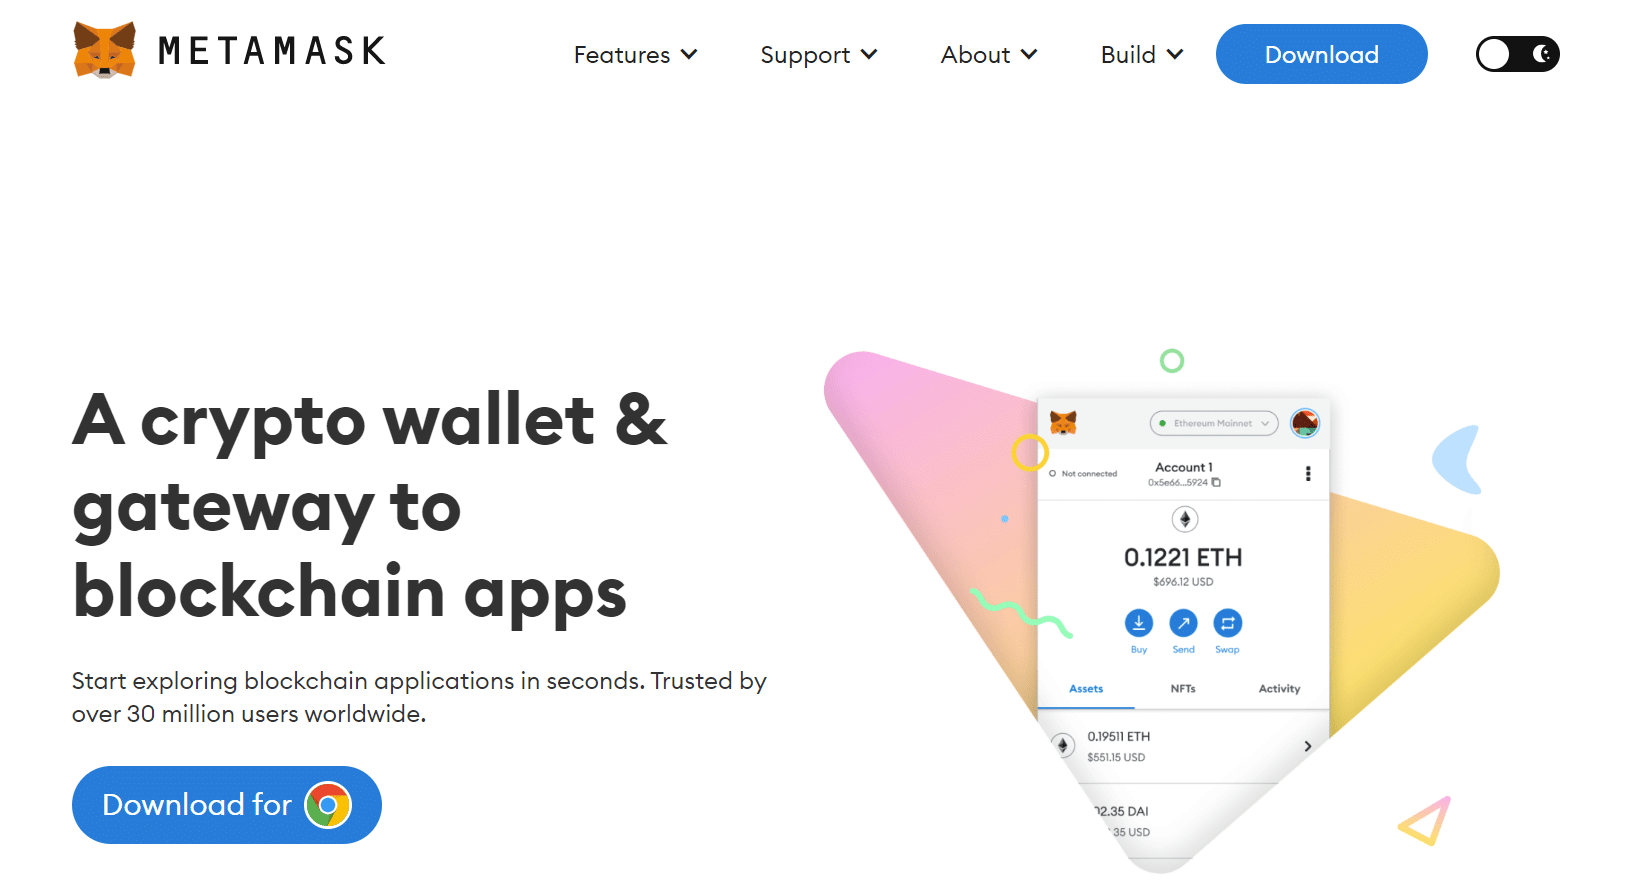 Features of the Metamask wallet